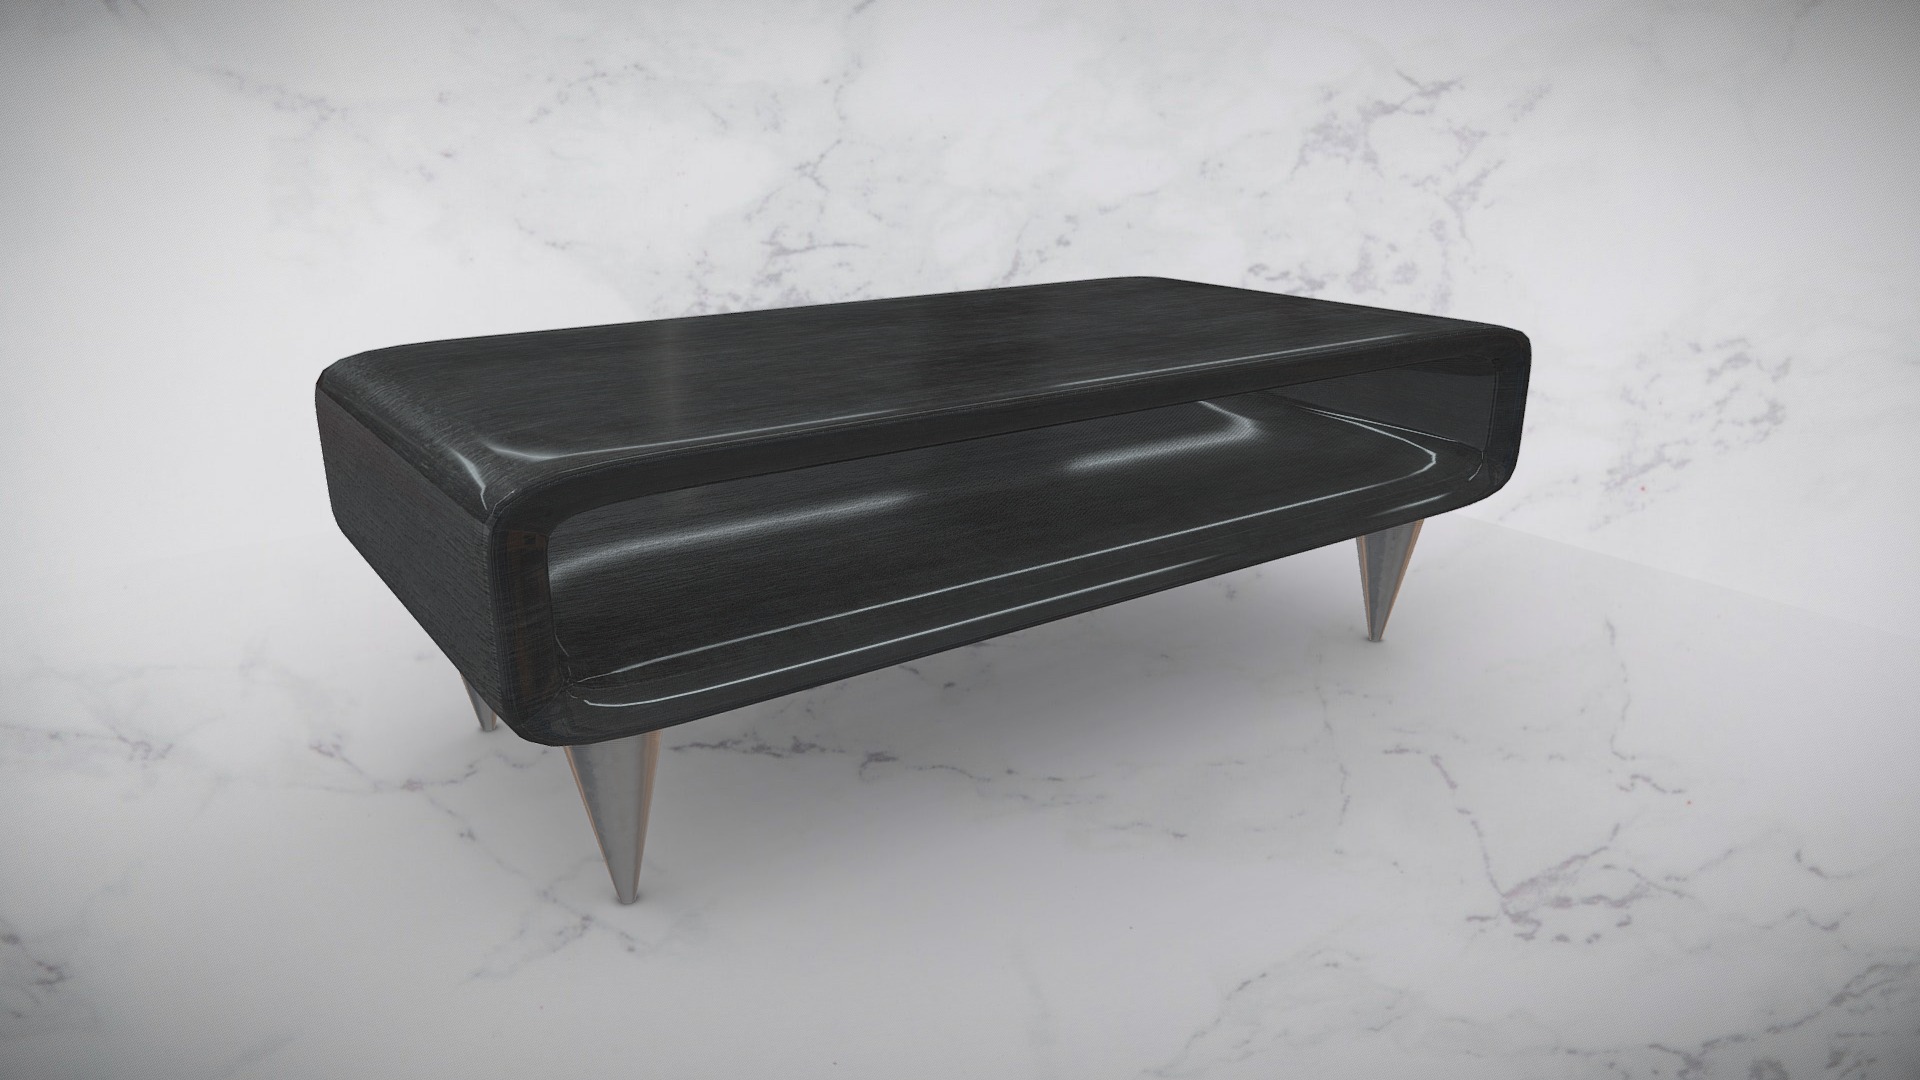 3D model Ultra Modern Coffee Table Retro Futuristic - This is a 3D model of the Ultra Modern Coffee Table Retro Futuristic. The 3D model is about a table covered in snow.